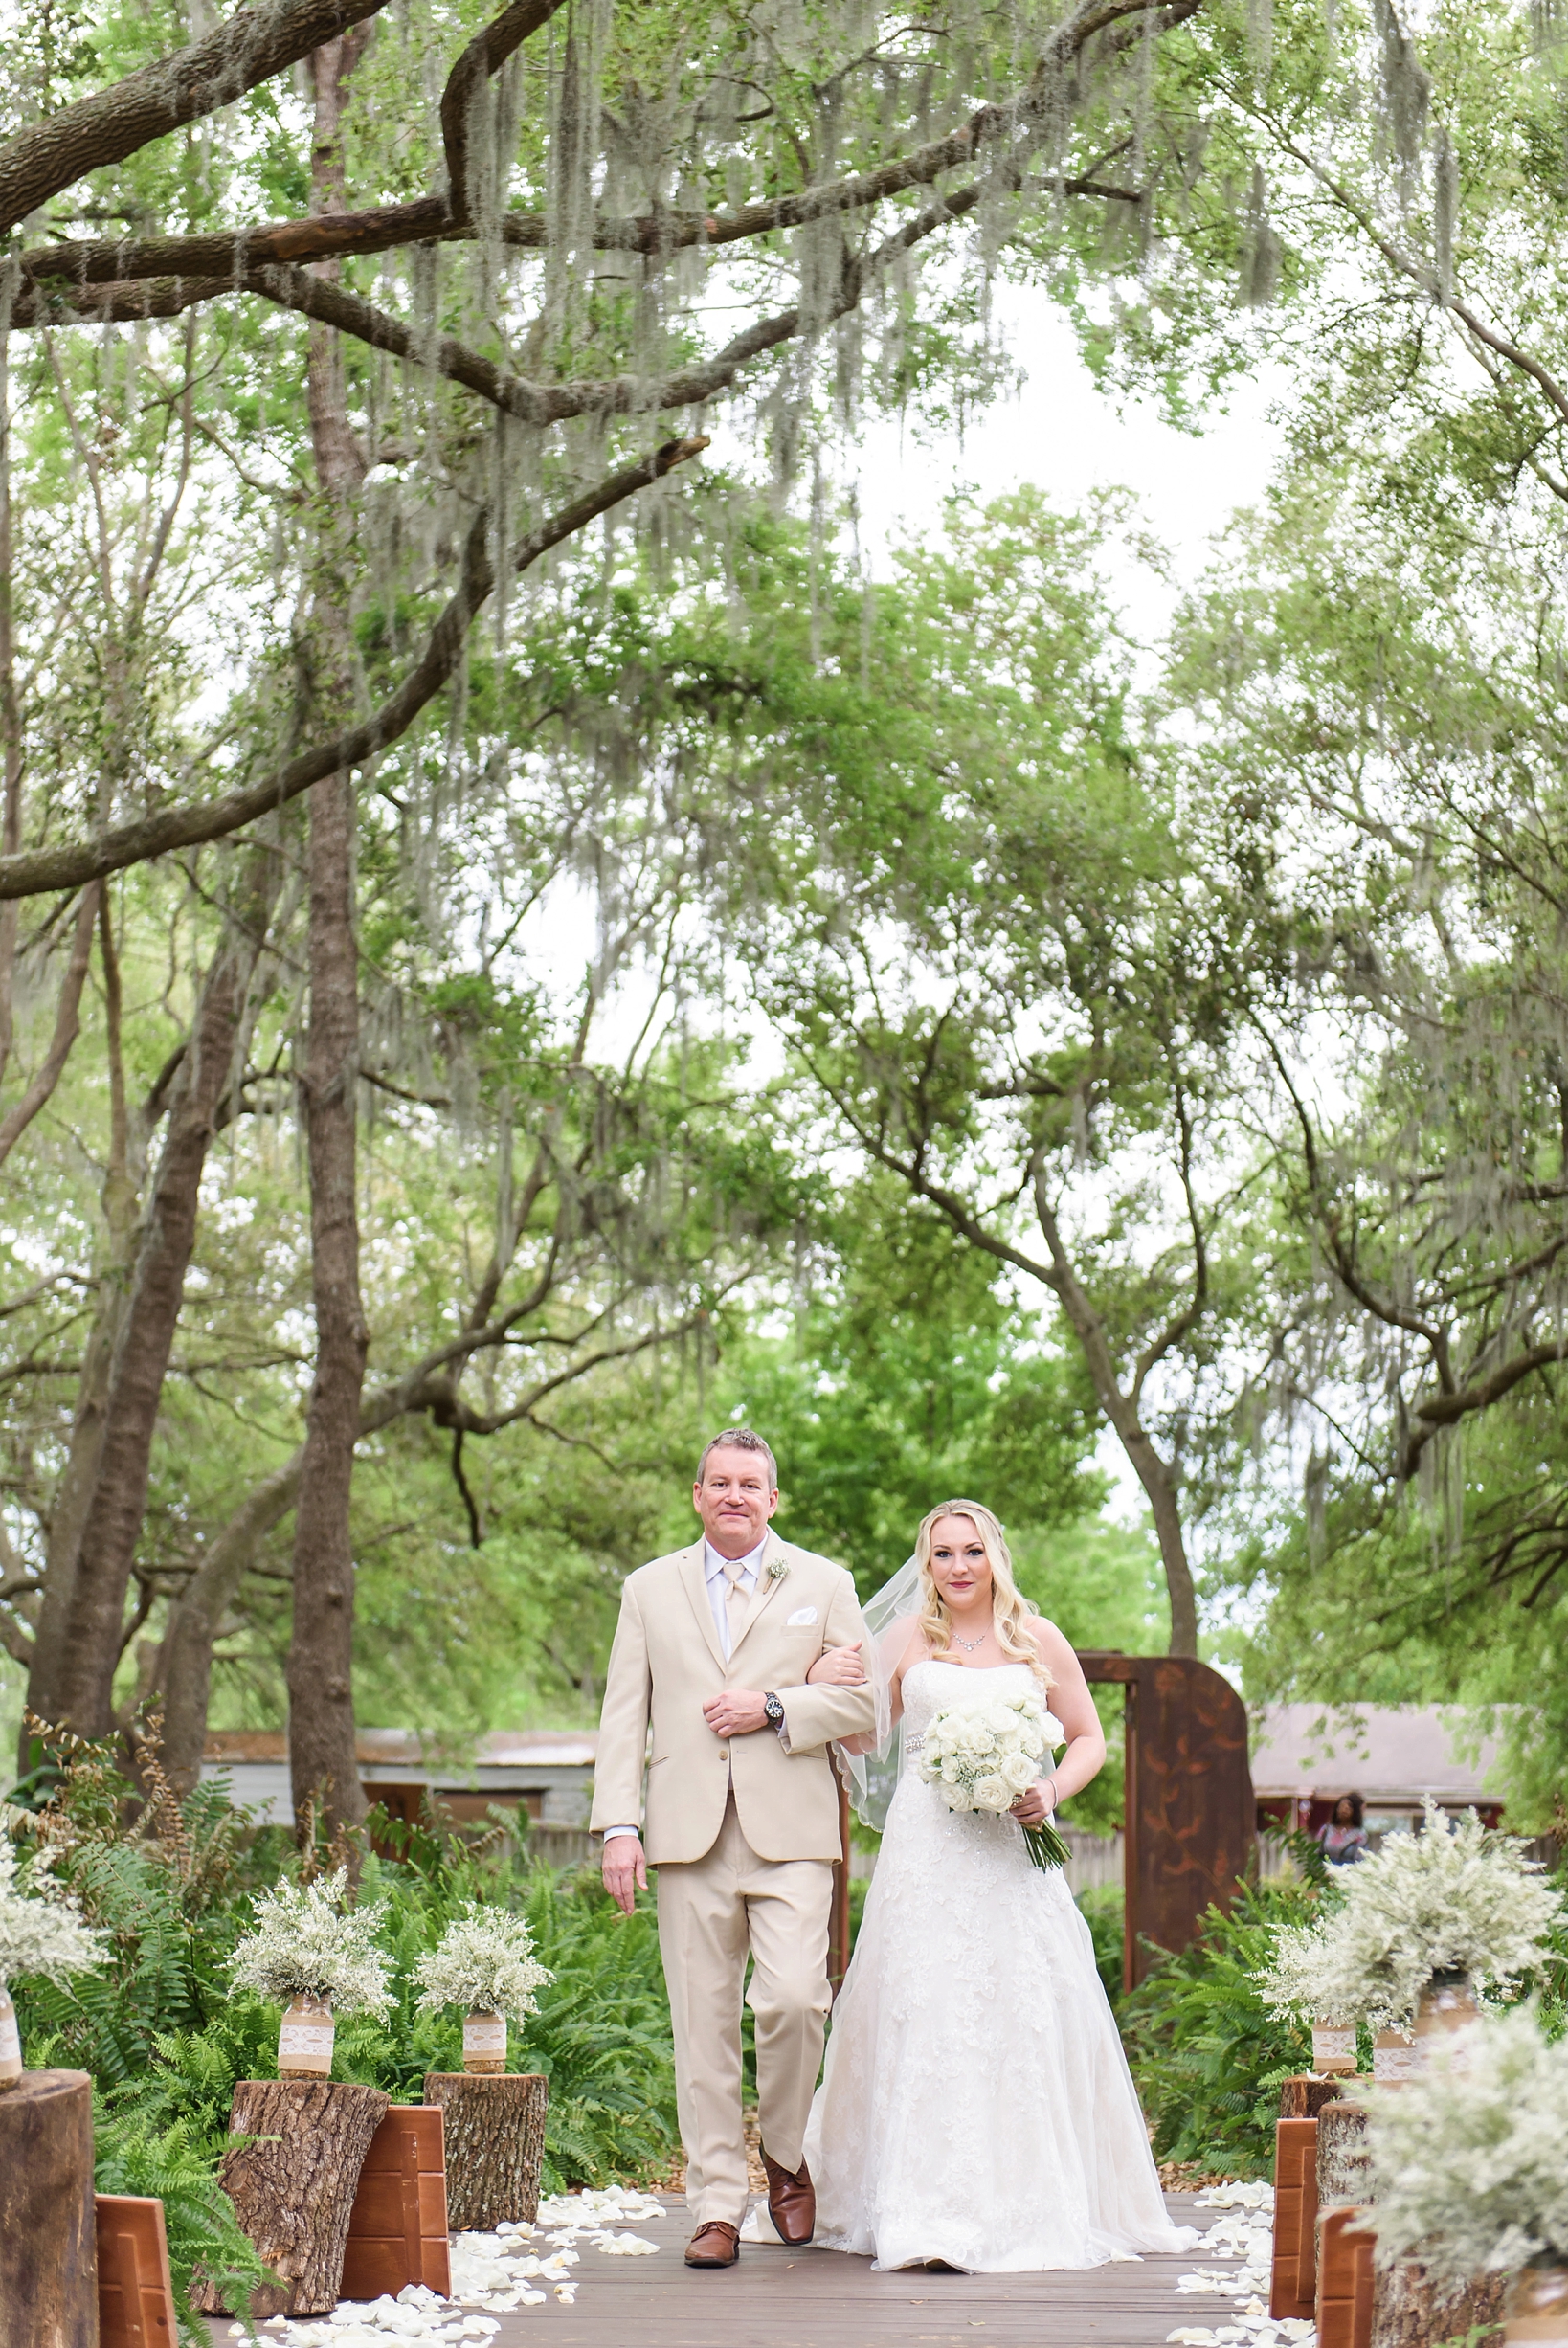 Bride and her father walking down the aisle surrounded by greenery